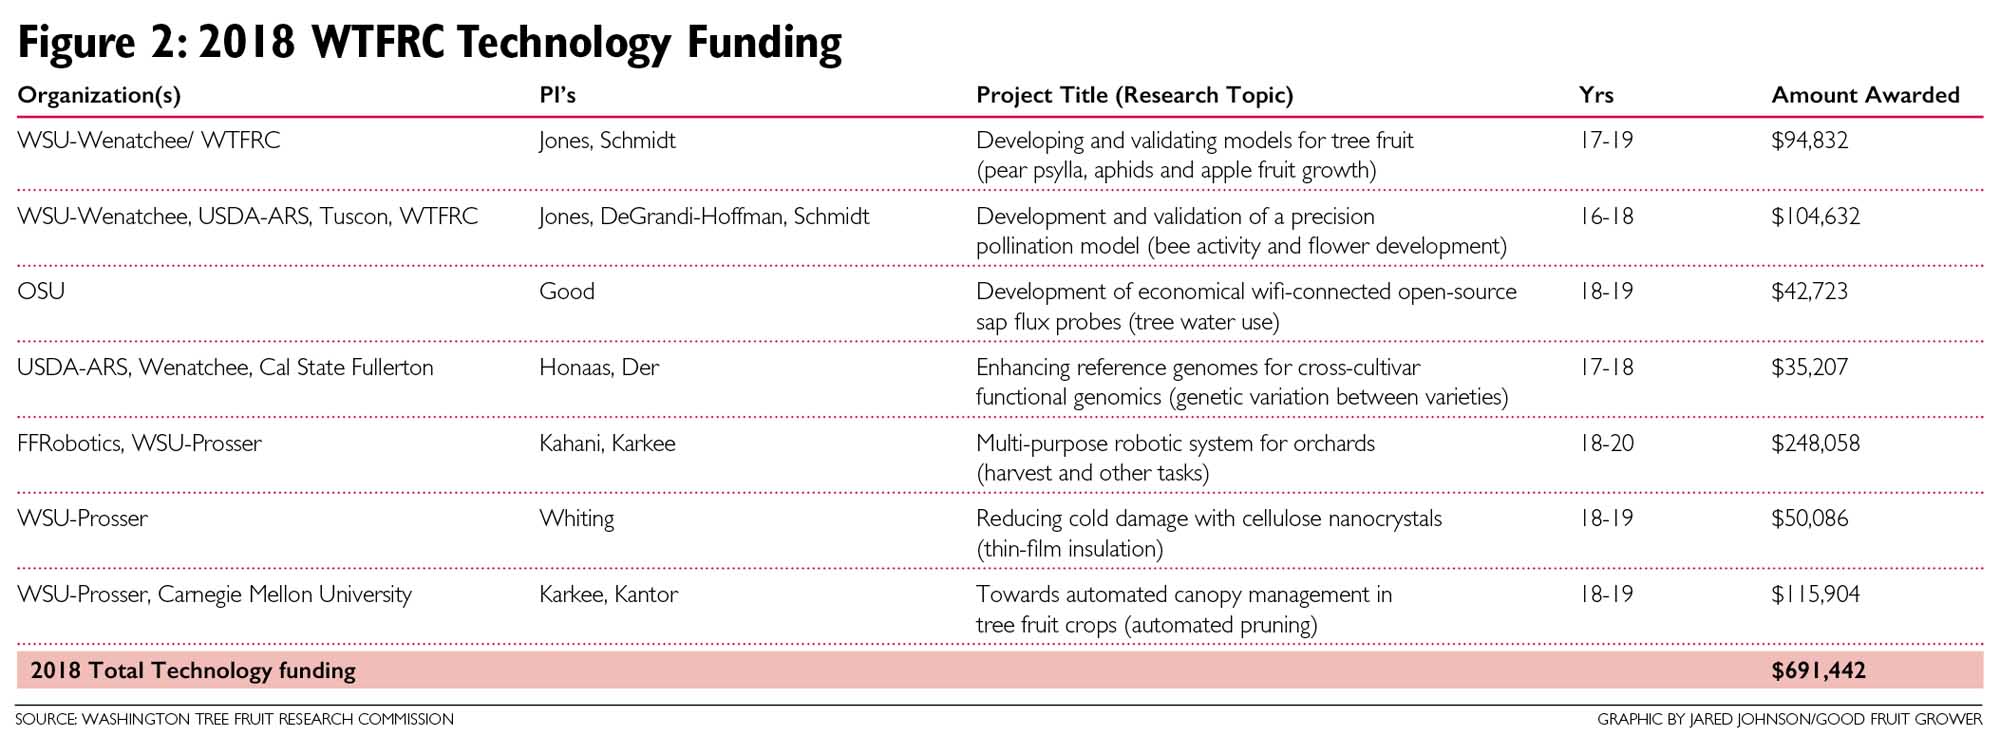 Figure 2: 2018 WTFRC Technology Funding. (Source: Washington Tree Fruit Research Commission. Graphic by Jared Johnson/Good Fruit Grower)